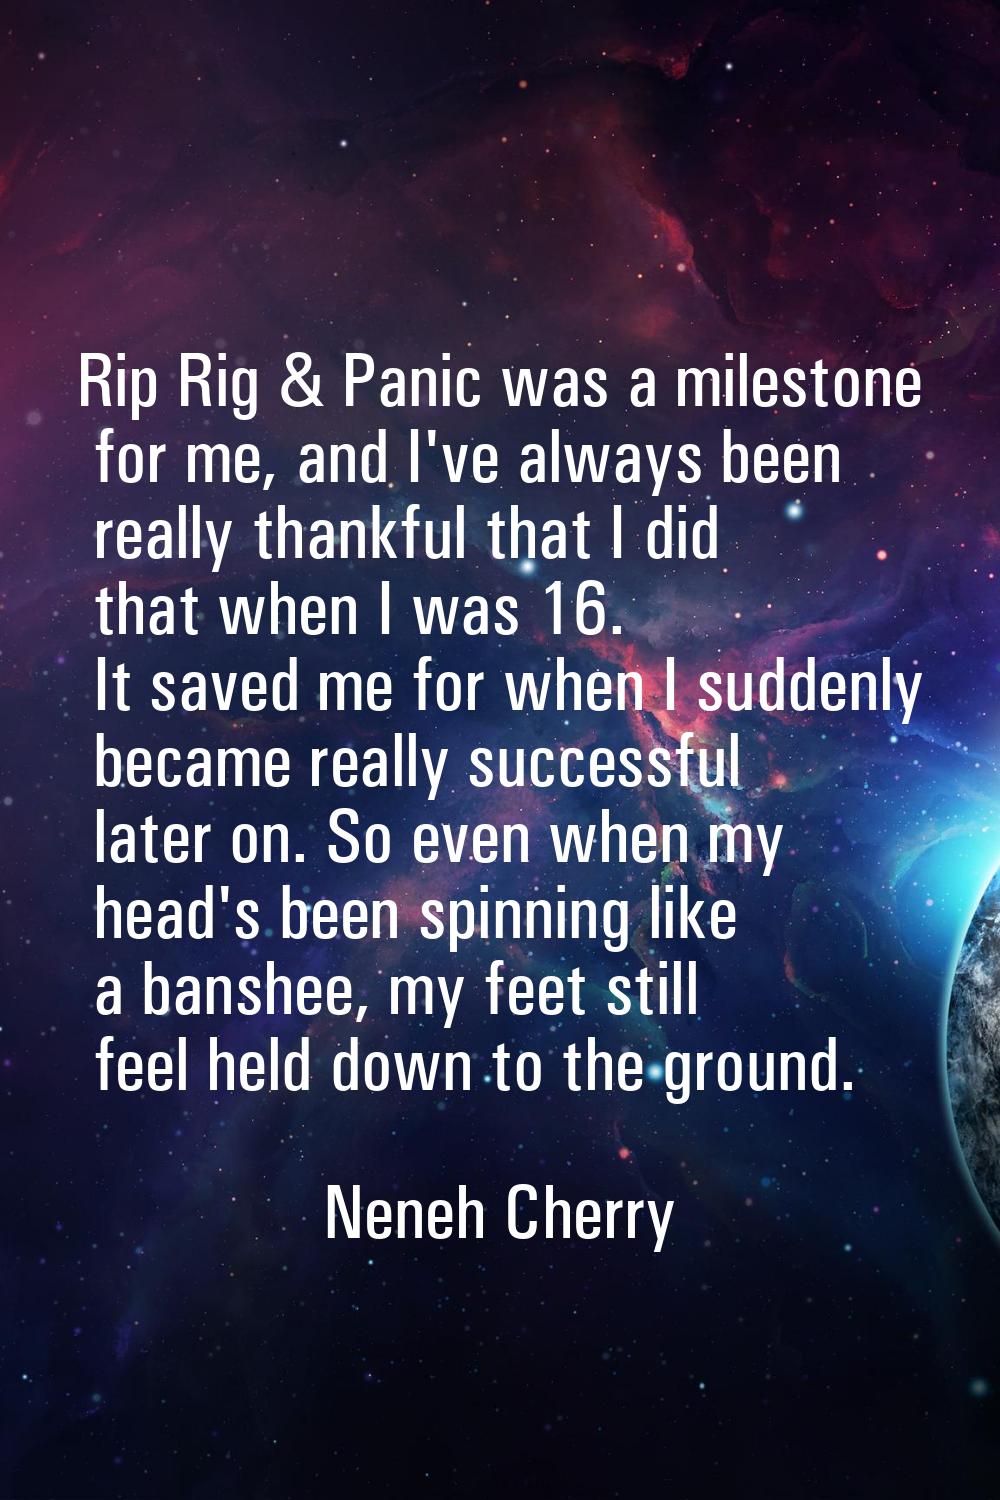 Rip Rig & Panic was a milestone for me, and I've always been really thankful that I did that when I